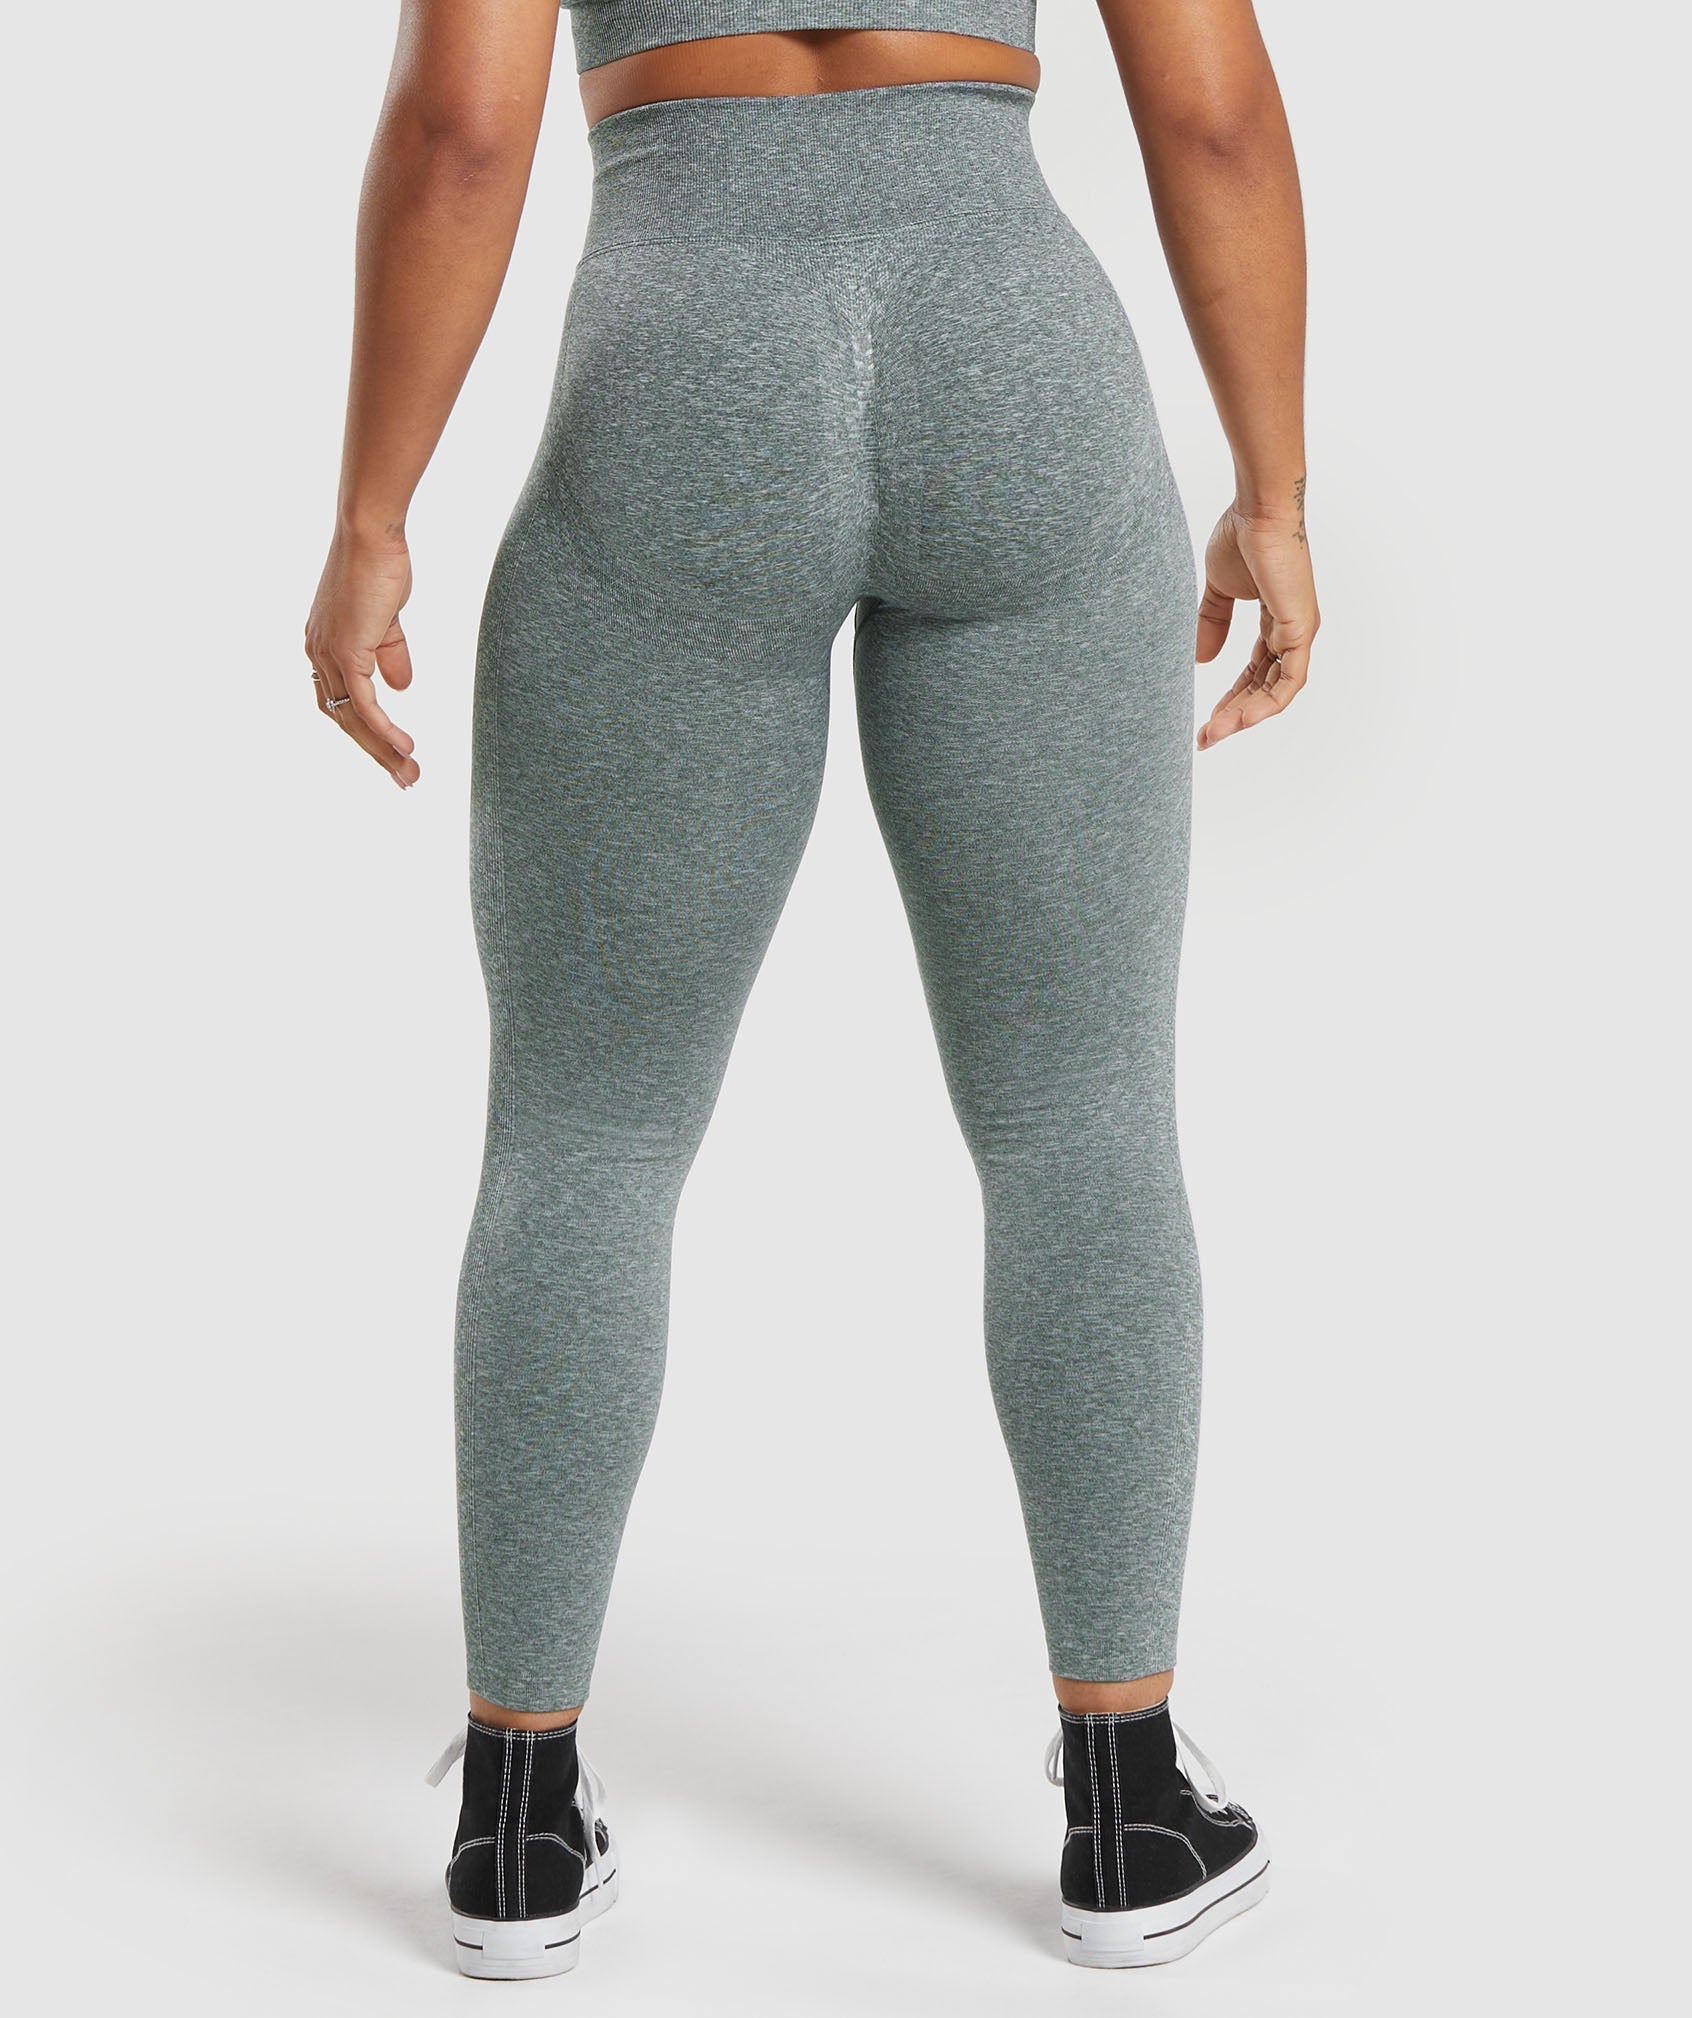 Lift Contour Seamless Leggings in Slate Teal/White Marl - view 4